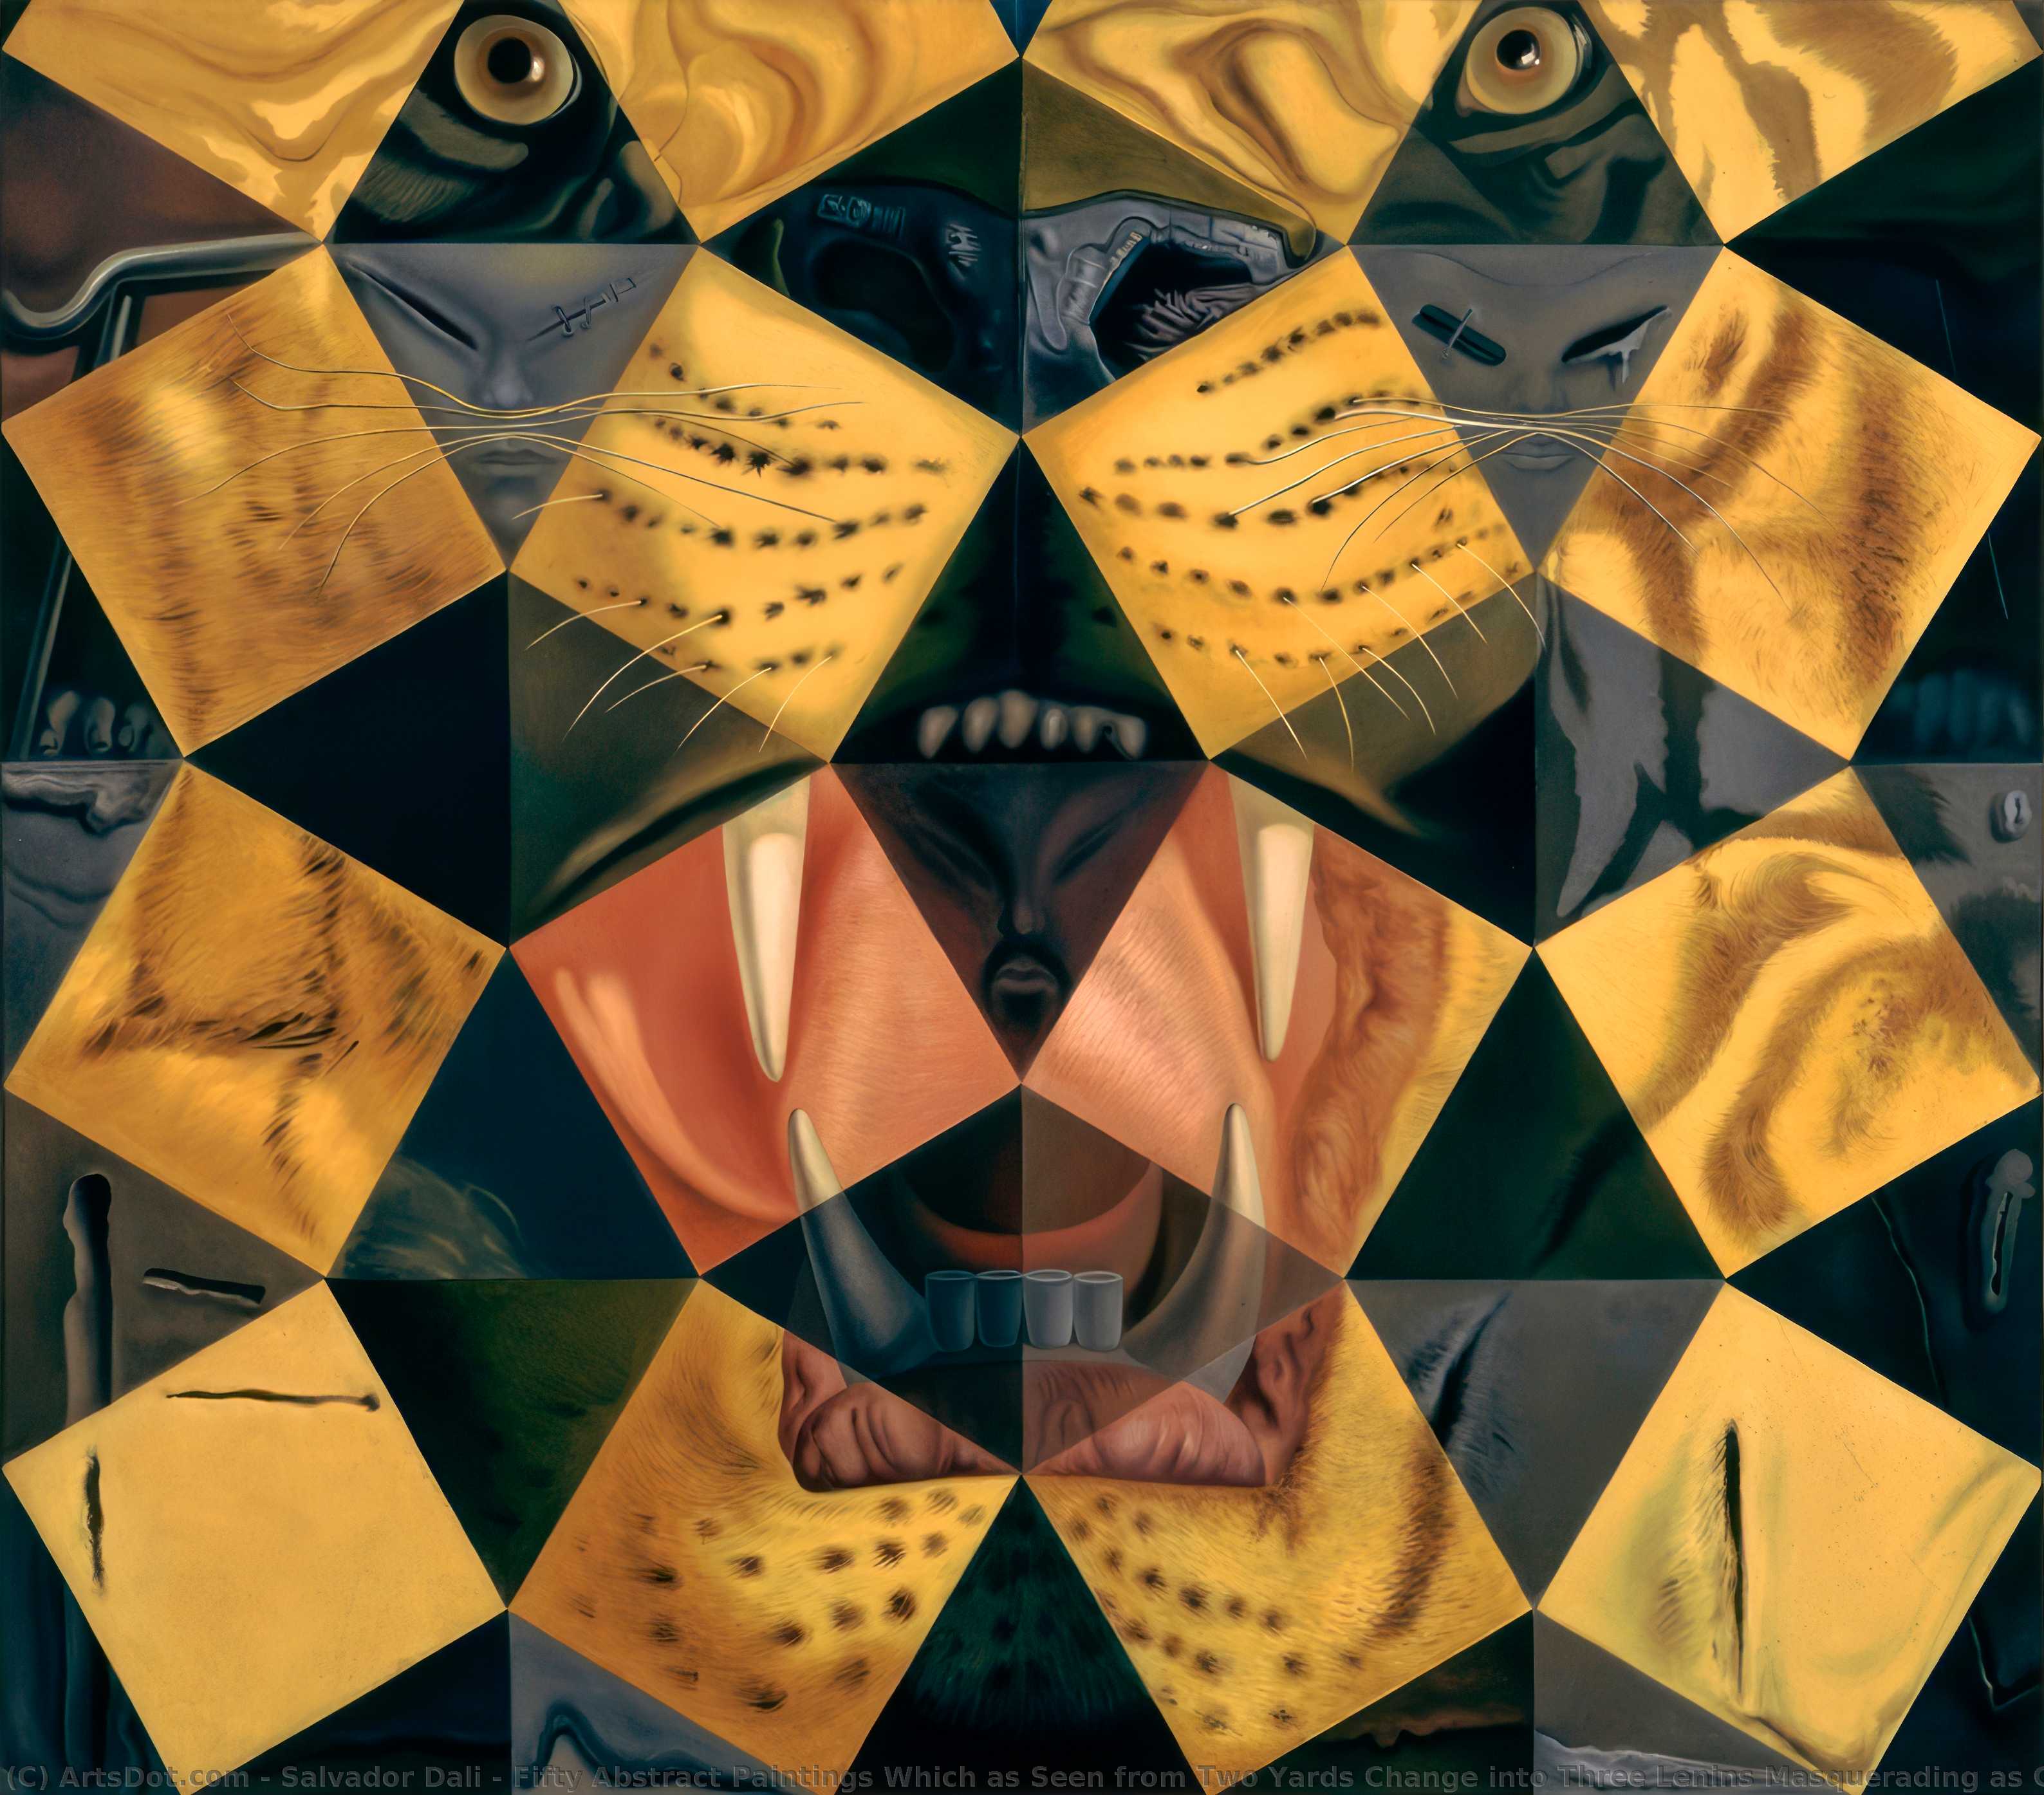 WikiOO.org - Encyclopedia of Fine Arts - Lukisan, Artwork Salvador Dali - Fifty Abstract Paintings Which as Seen from Two Yards Change into Three Lenins Masquerading as Chinese and as Seen from Six Yards Appear as the Head of a Royal Bengal Tiger, 1963